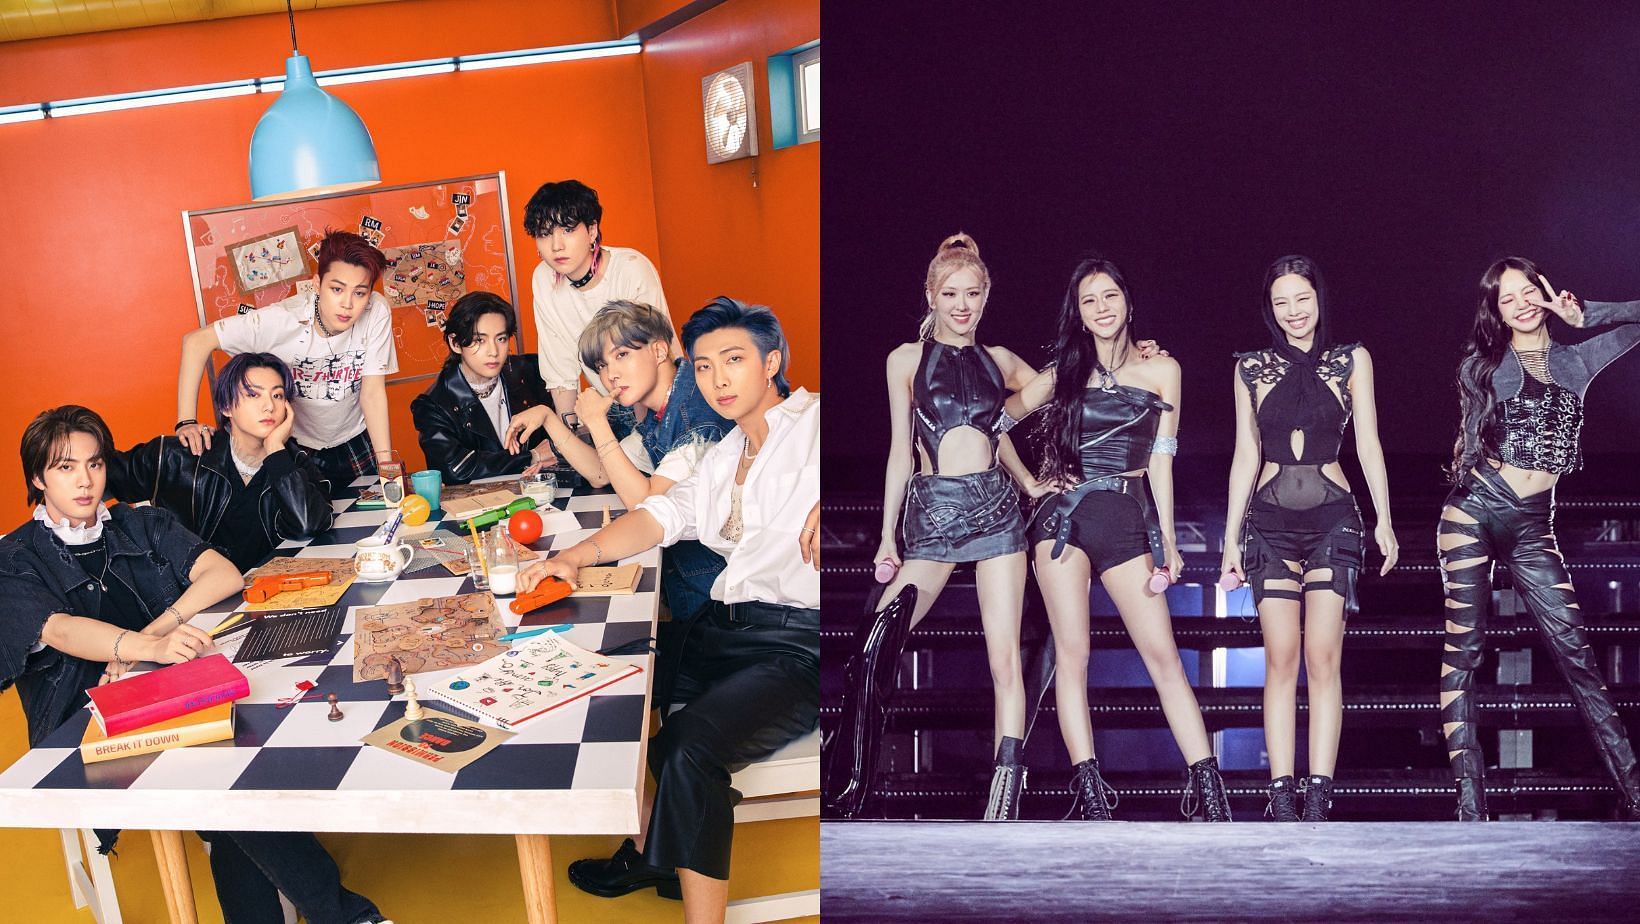 Top 7 highest-grossing K-pop concerts of all time. (Images via X/@BIGHIT_MUSIC and @BLACKPINK)